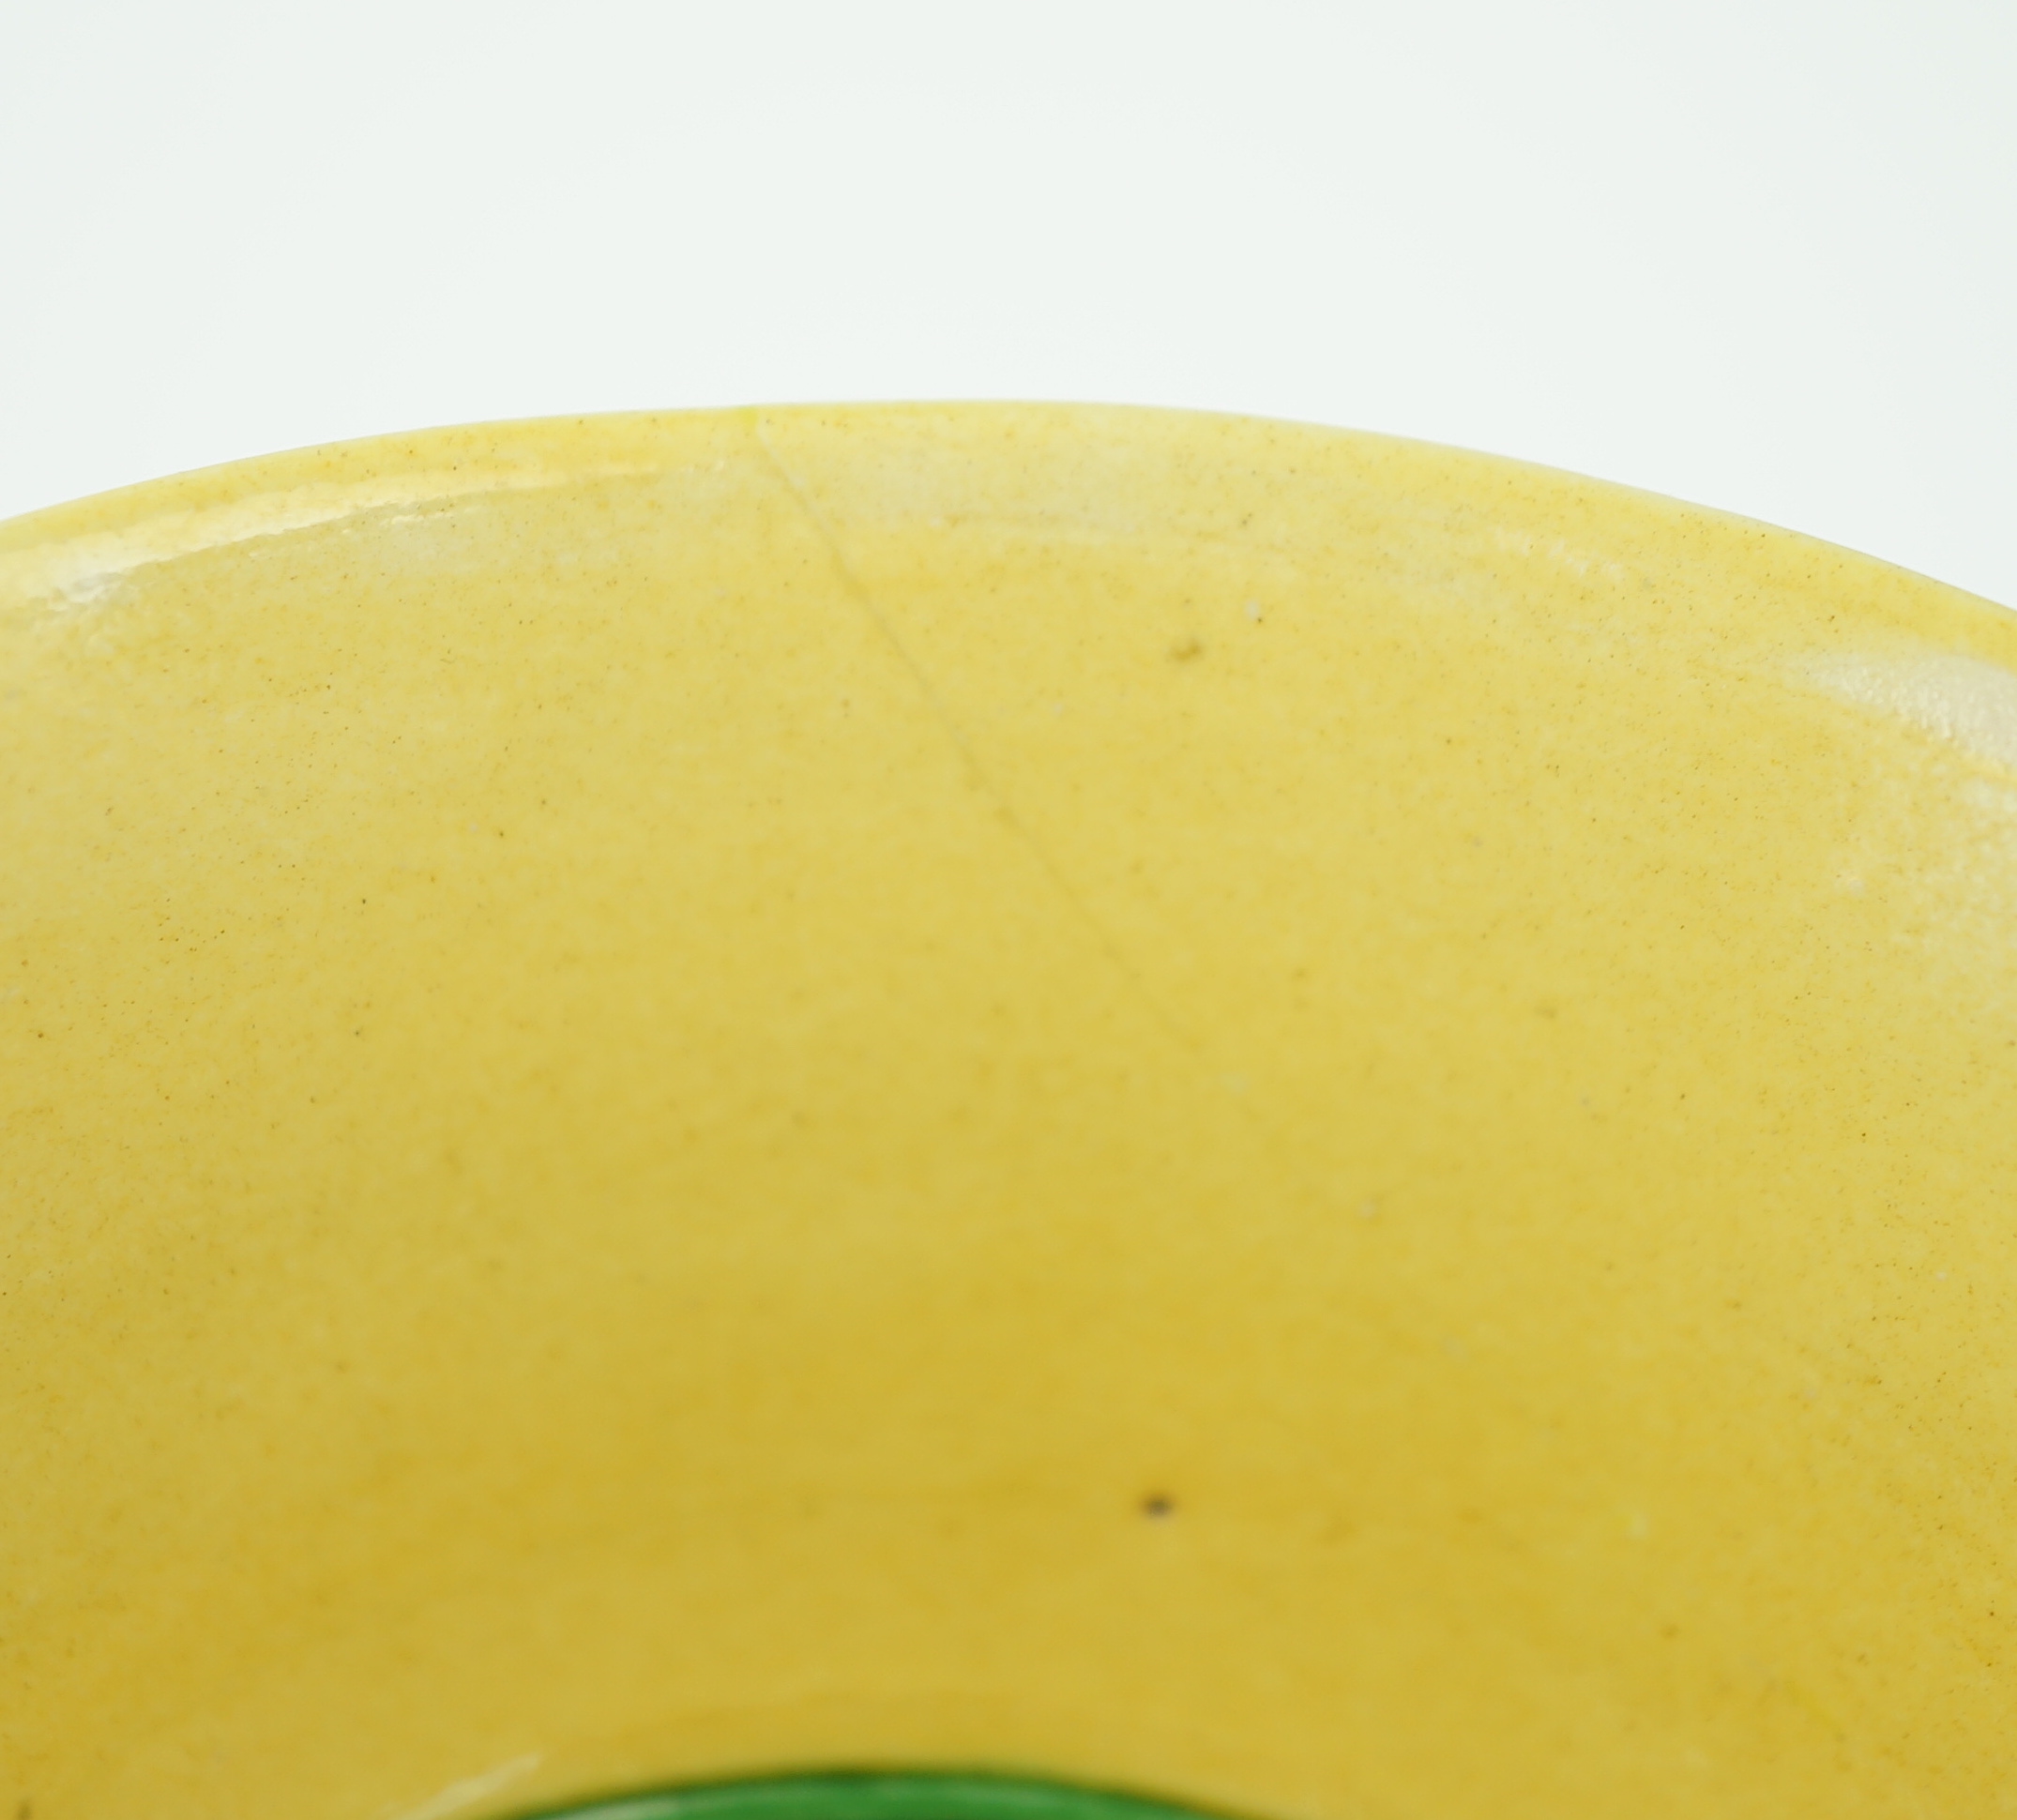 A Chinese green and yellow glazed 'dragon' bowl, Daoguang mark and of the period (1821-50), section of rim broken and restored, hairline cracks